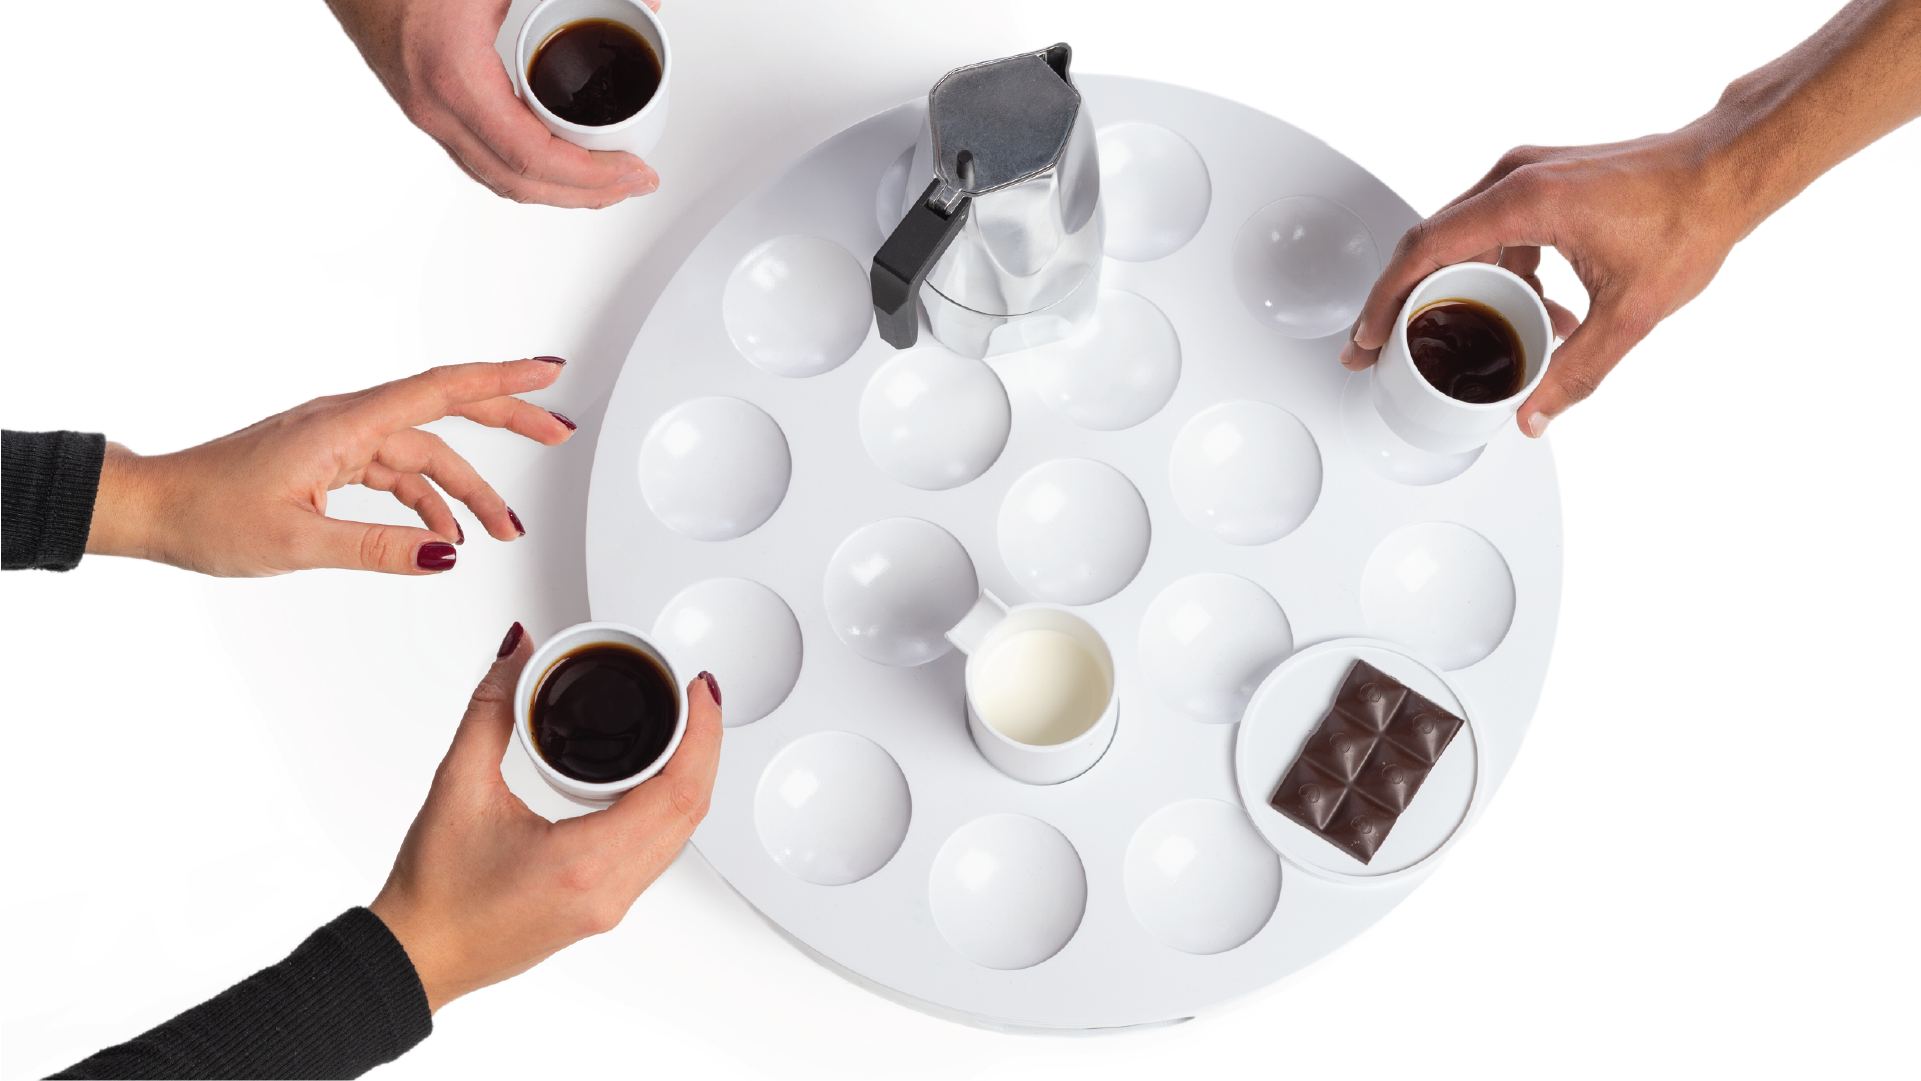 Top view of the coffee set. The set has circular slots on its top surfaces where hands are putting cups on it. There is a tray with food and a kettle on the top of the tray.